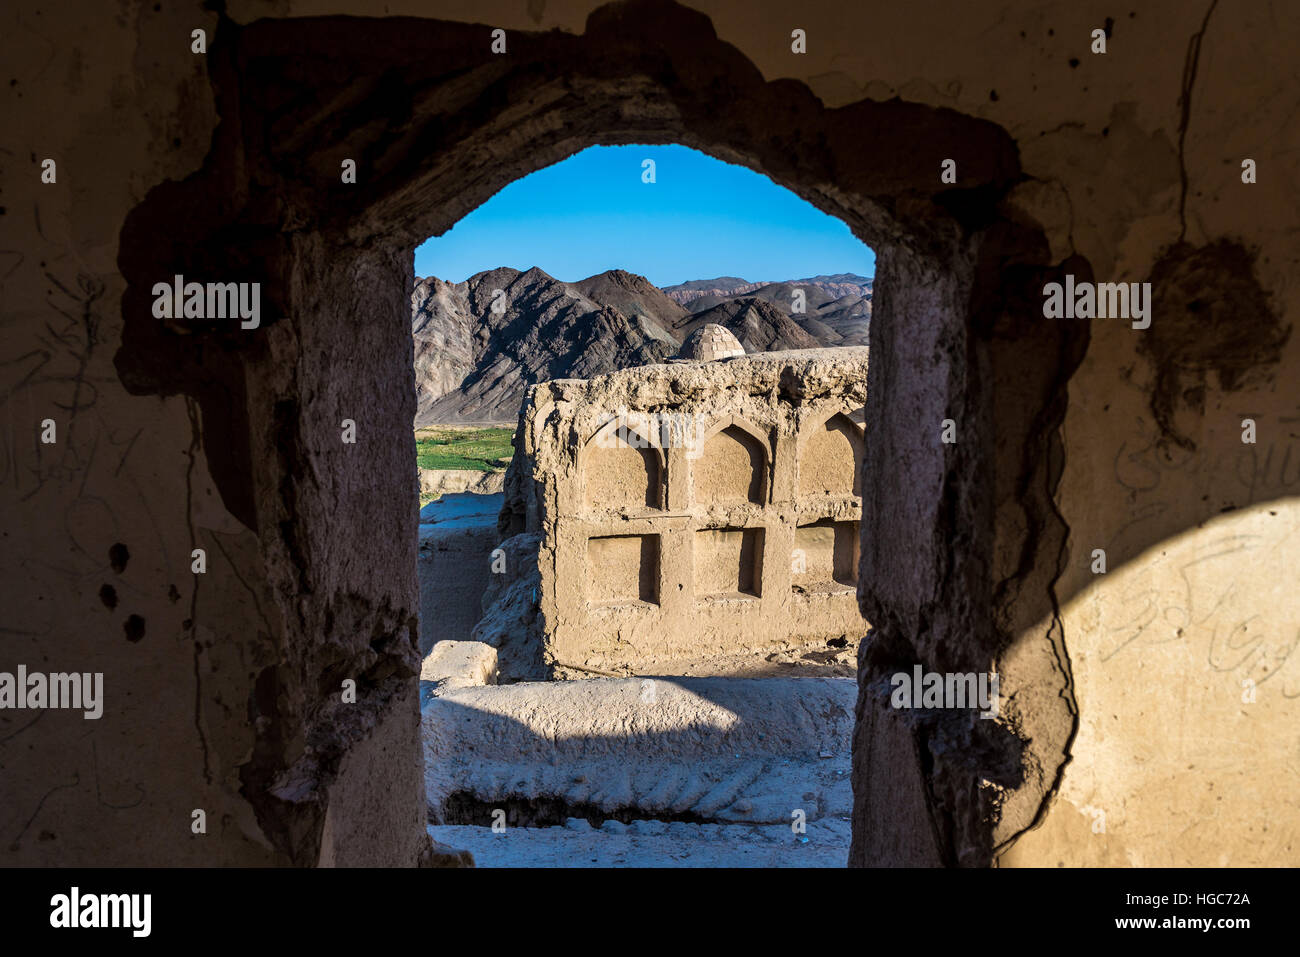 Inside the mudbrick house in old, abandoned part of Kharanaq village in Ardakan County, Yazd Province, Iran Stock Photo